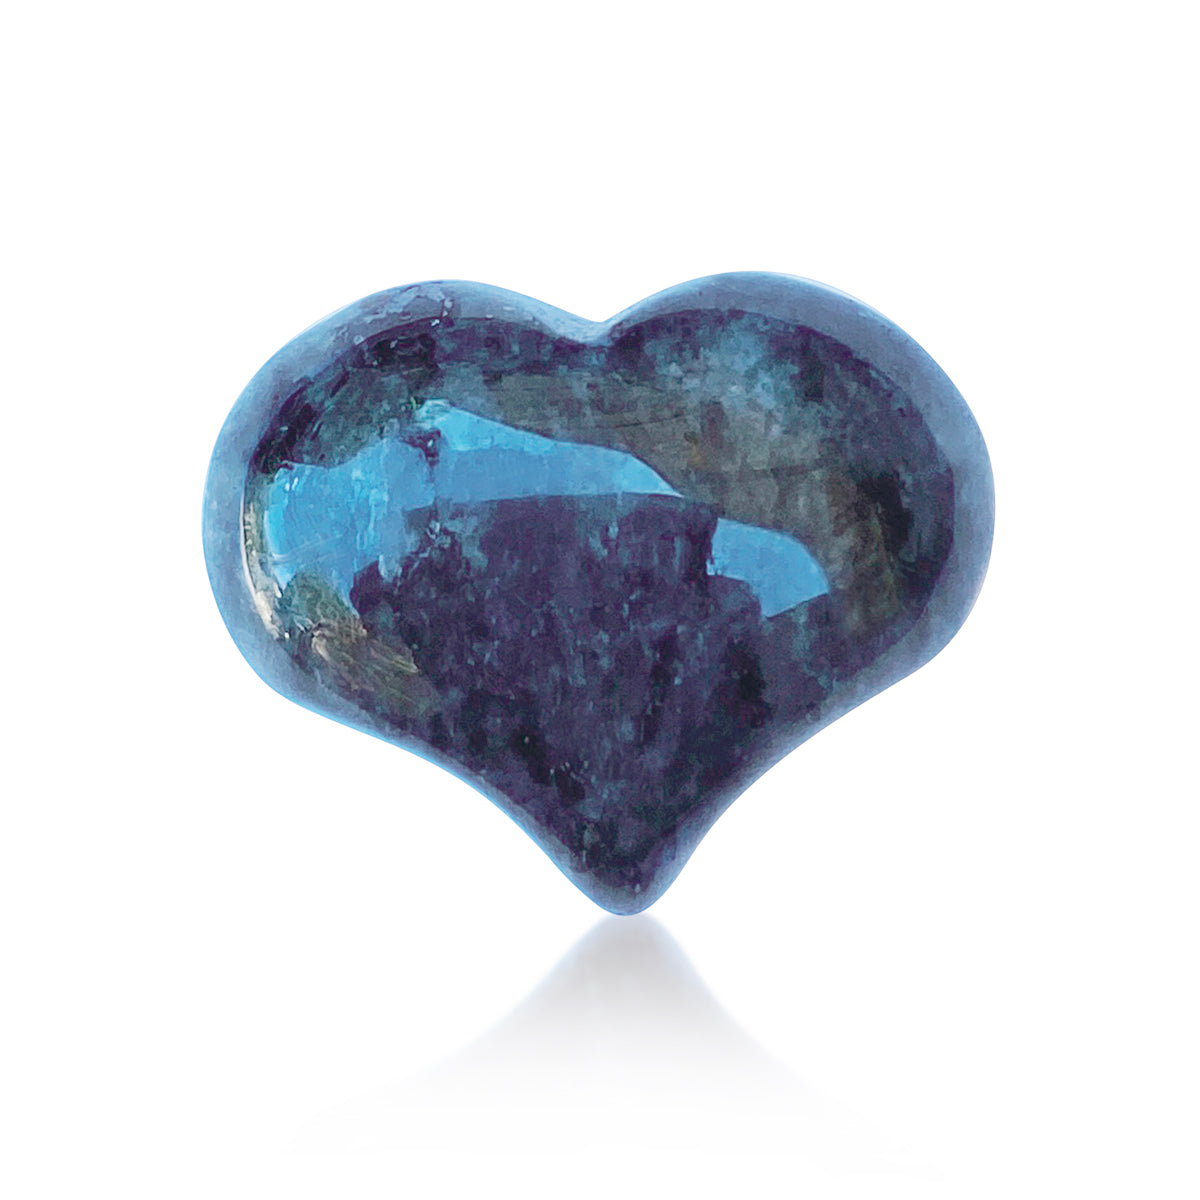 Unique and genuine Labradorite Heart Shaped Healing Gemstone for a Positive Change. Labradorite contains energies that boost ones ability to repel anxiety and depression, and inspire the wearer with a sense of enthusiasm and self-confidence.